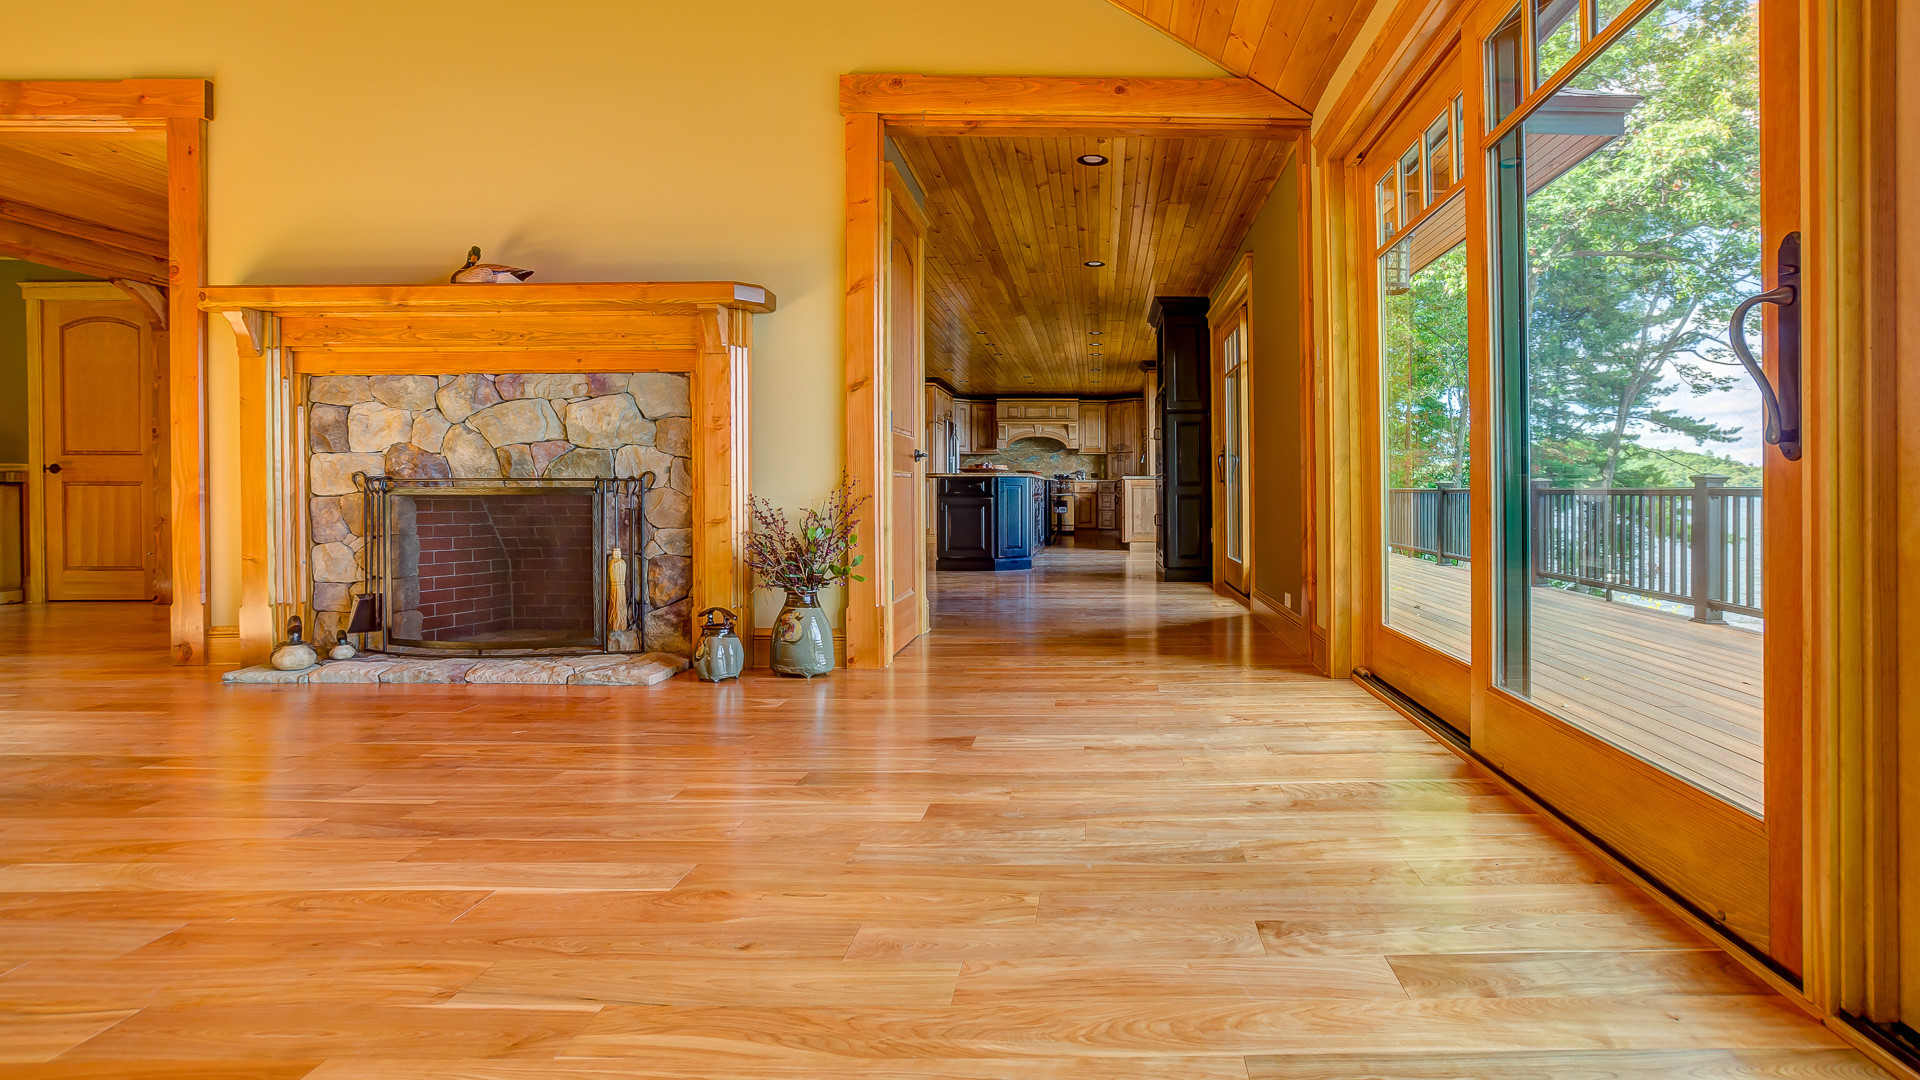 20 Wonderful Hardwood Flooring Plaistow Nh 2024 free download hardwood flooring plaistow nh of hardwood flooring goedecke decorating inside searching for a custom look ask our friendly staff about our hand scraped planks wide widths borders medallions 